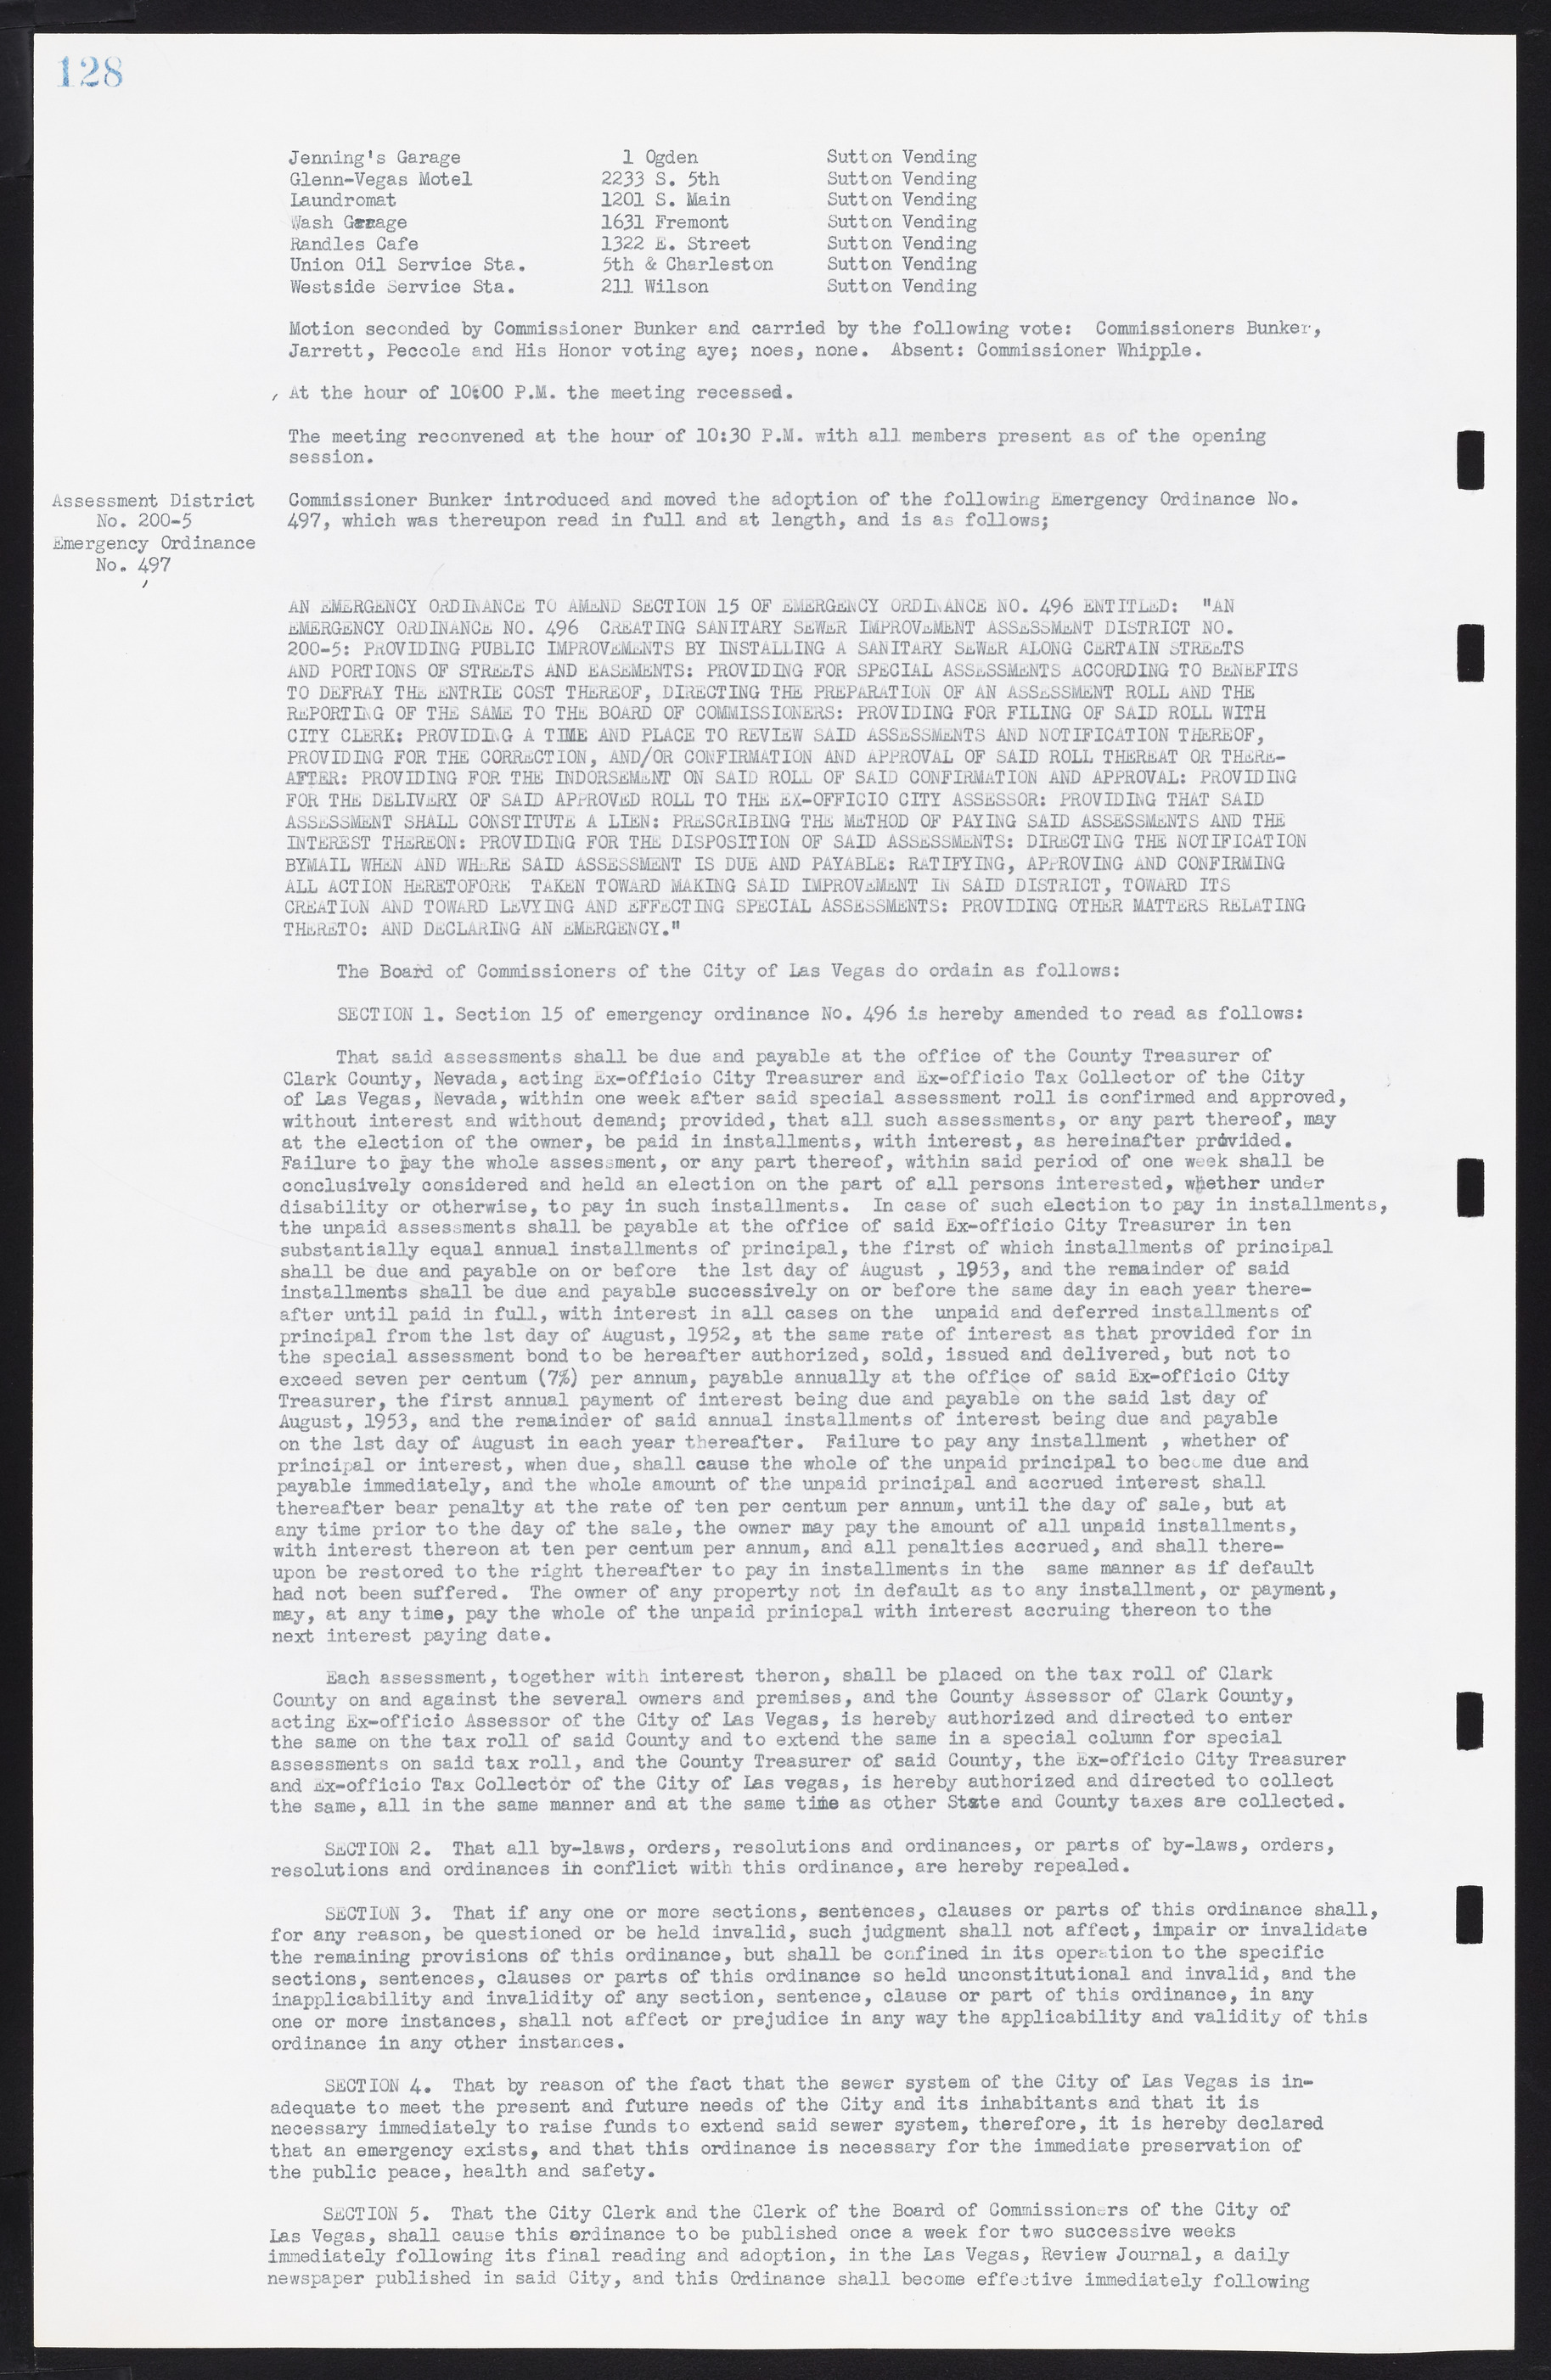 Las Vegas City Commission Minutes, May 26, 1952 to February 17, 1954, lvc000008-134